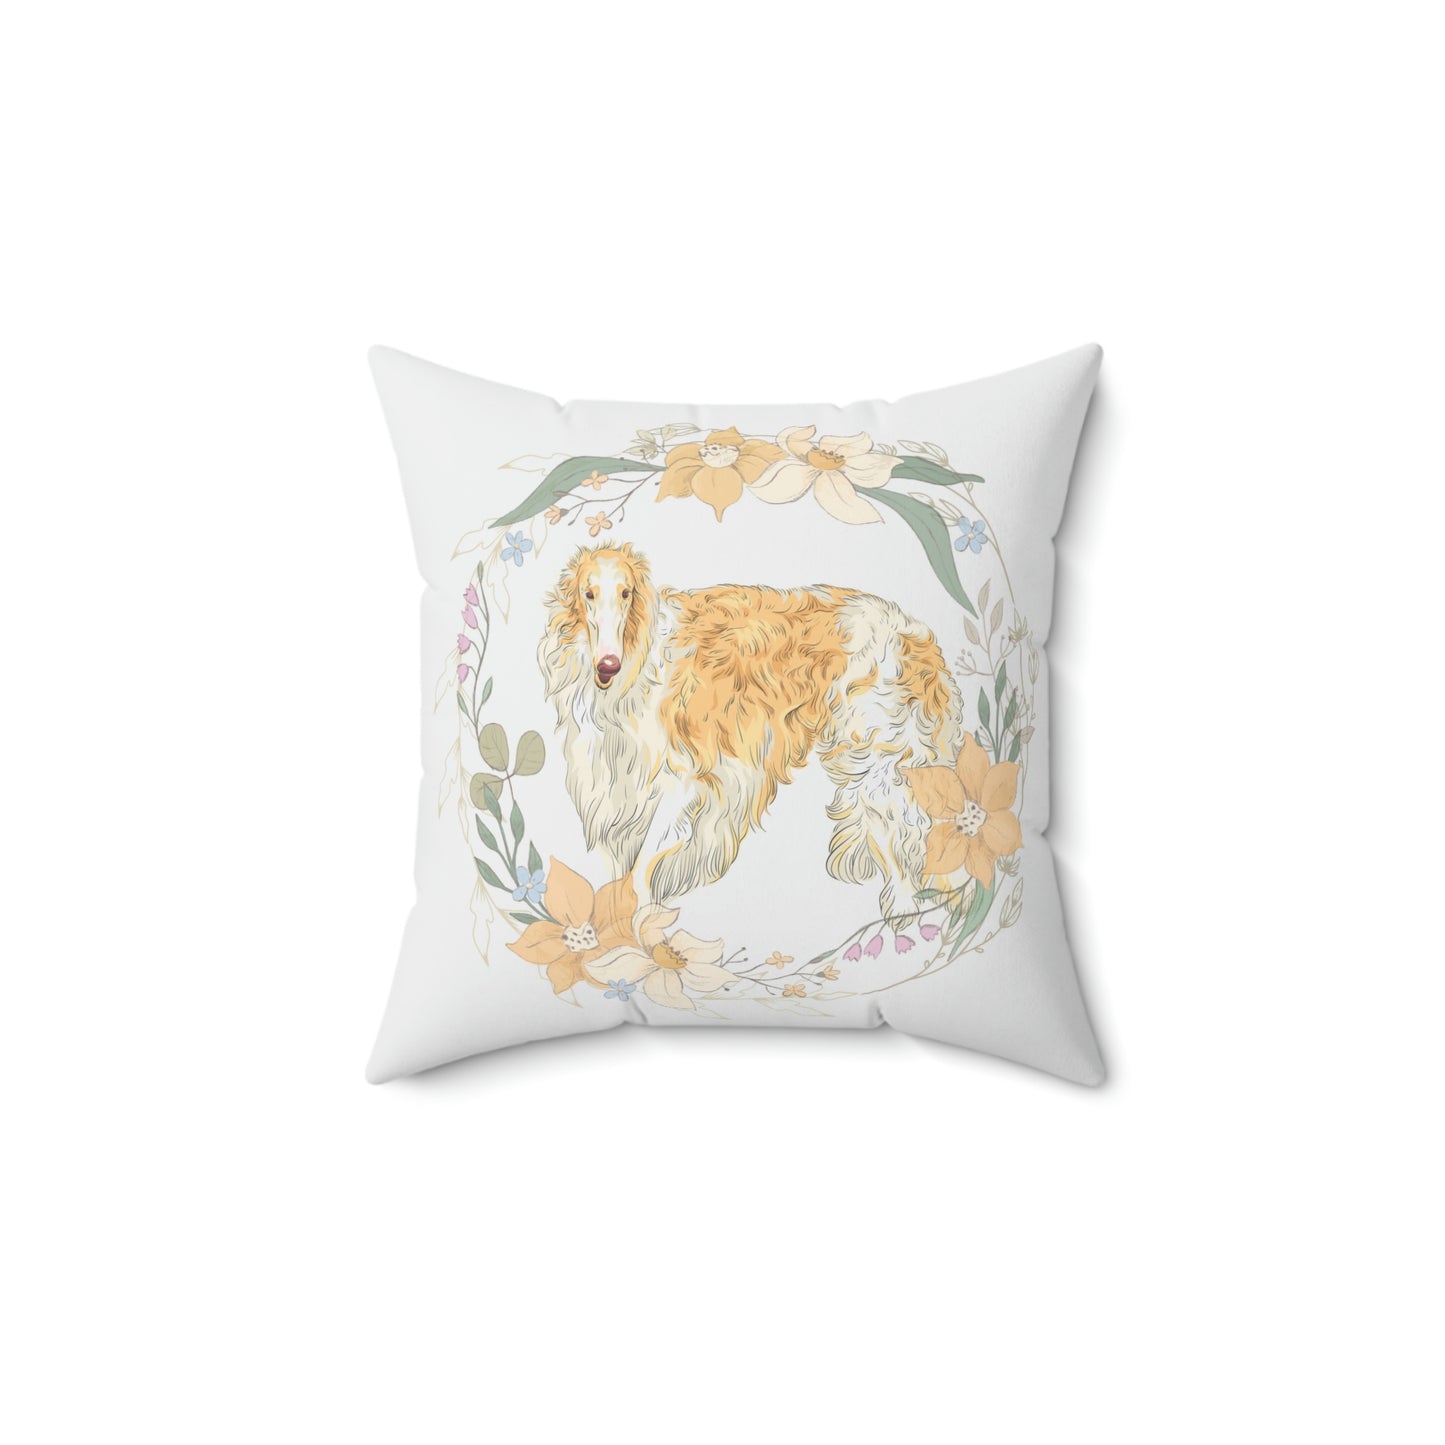 Borzoi Dog with Floral Wreath design Spun Polyester Square Indoor Pillow